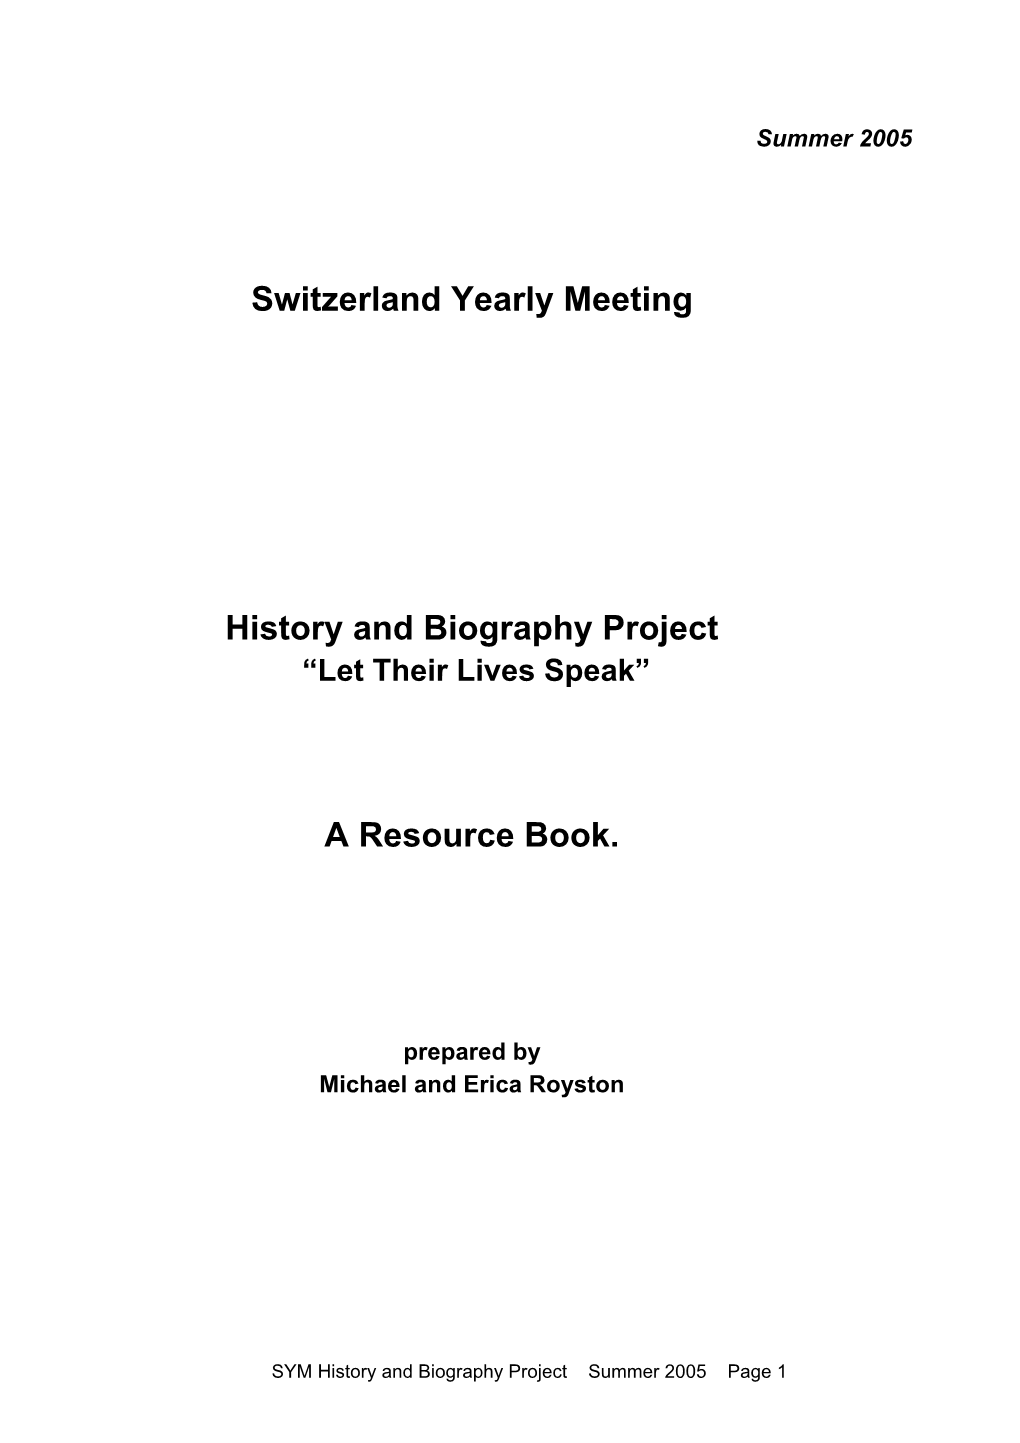 Switzerland Yearly Meeting History and Biography Project a Resource